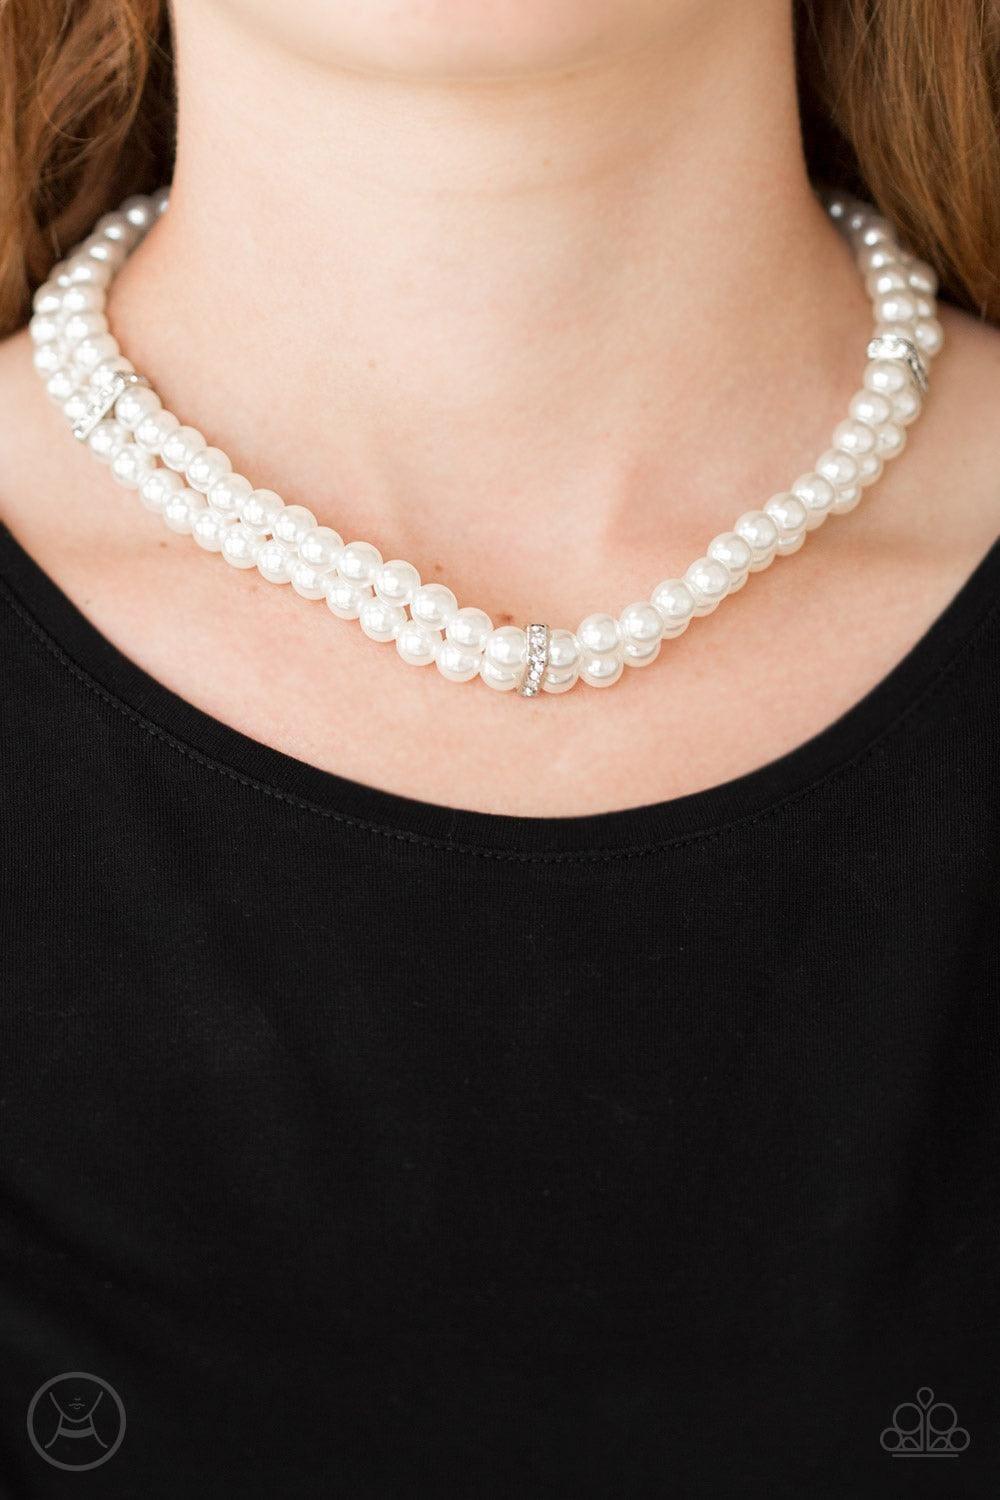 Paparazzi Accessories - Put On Your Party Dress - White Choker Necklace - Bling by JessieK